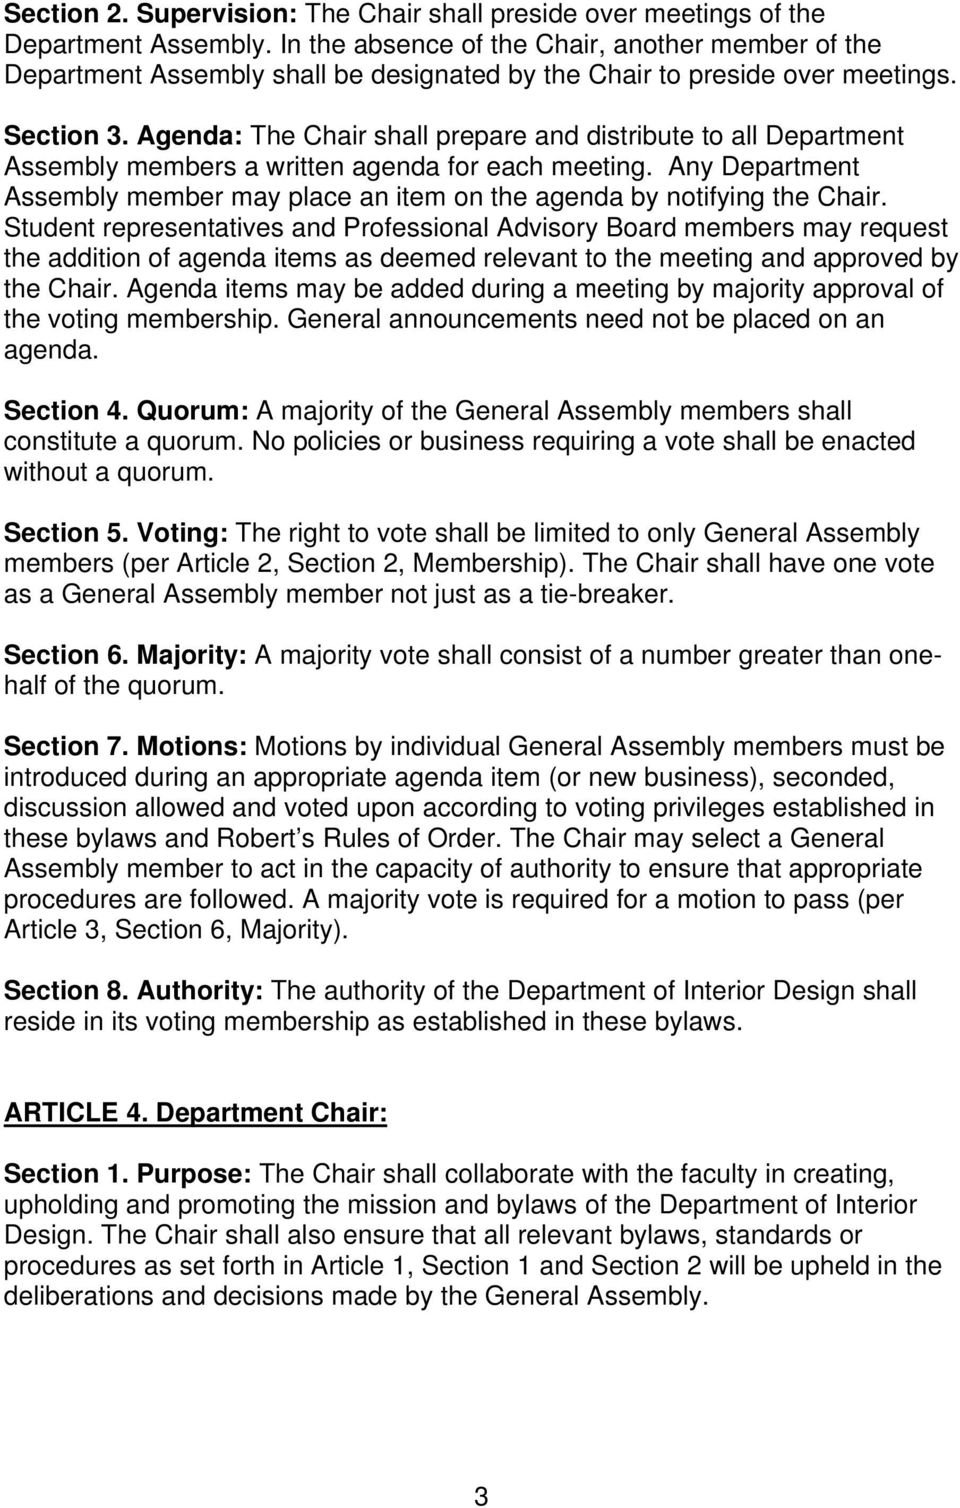 Agenda: The Chair shall prepare and distribute to all Department Assembly members a written agenda for each meeting.